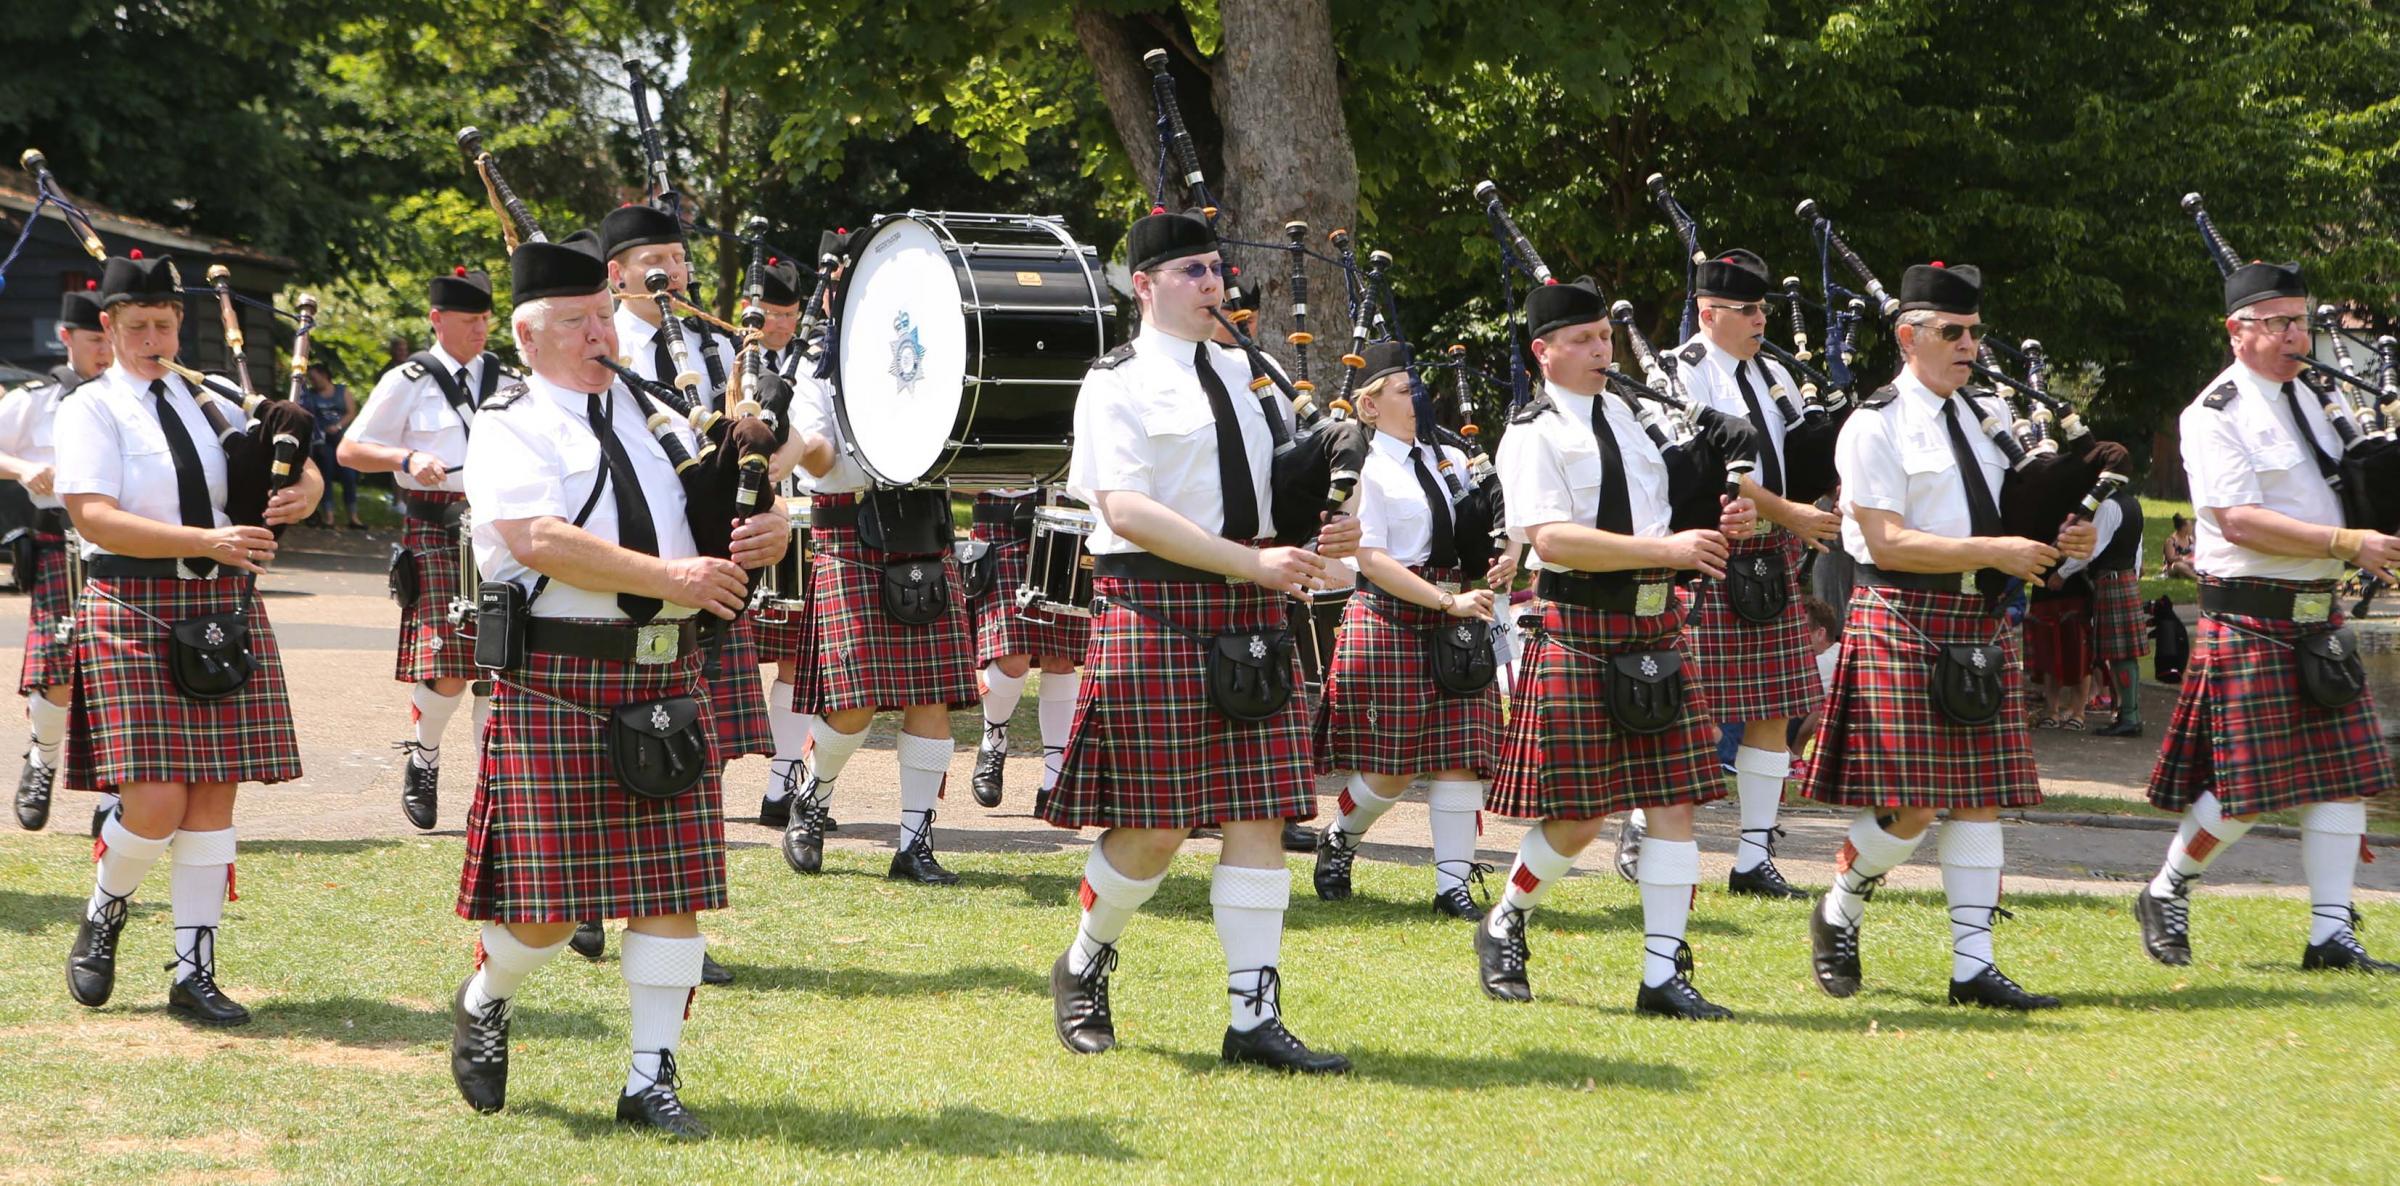 PICTURES: Pipes and drums play music through the town at Scotland in Colchester event